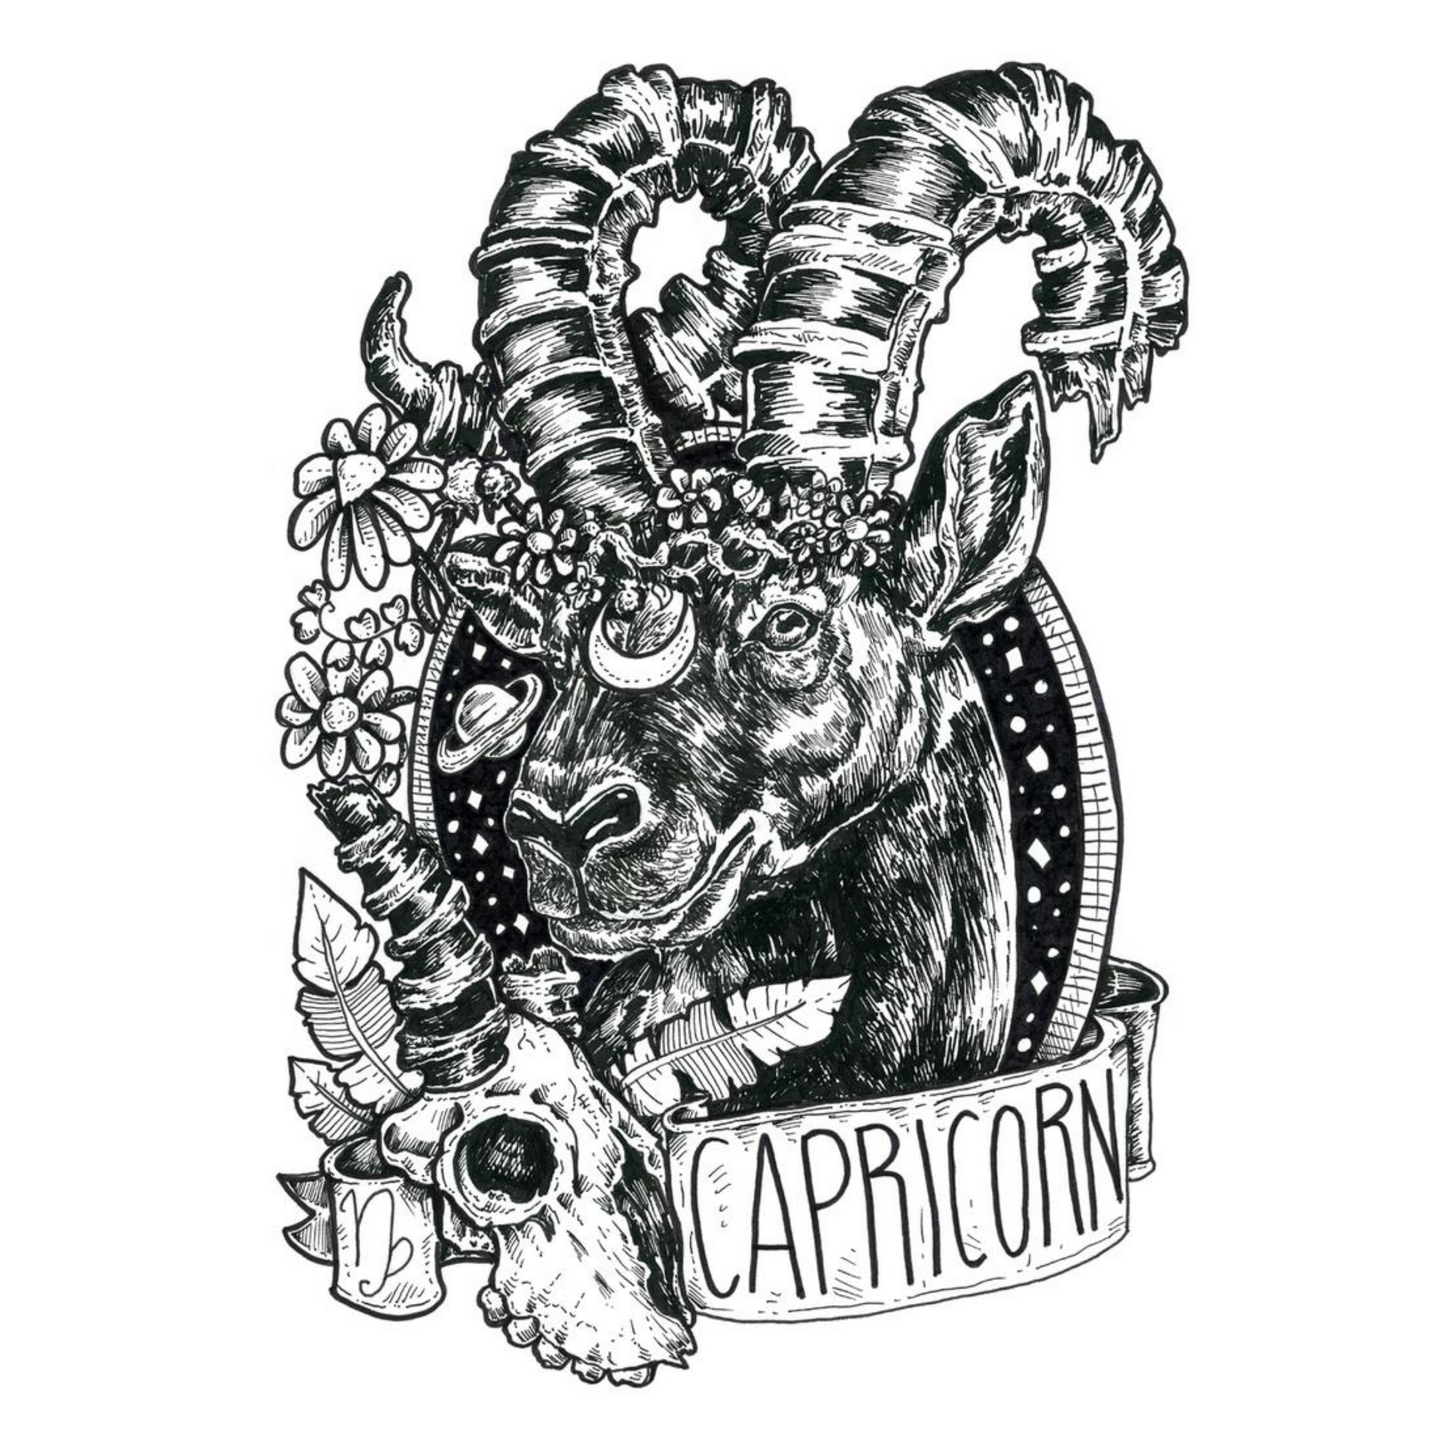 Capricorn by Wicked Good Perfume